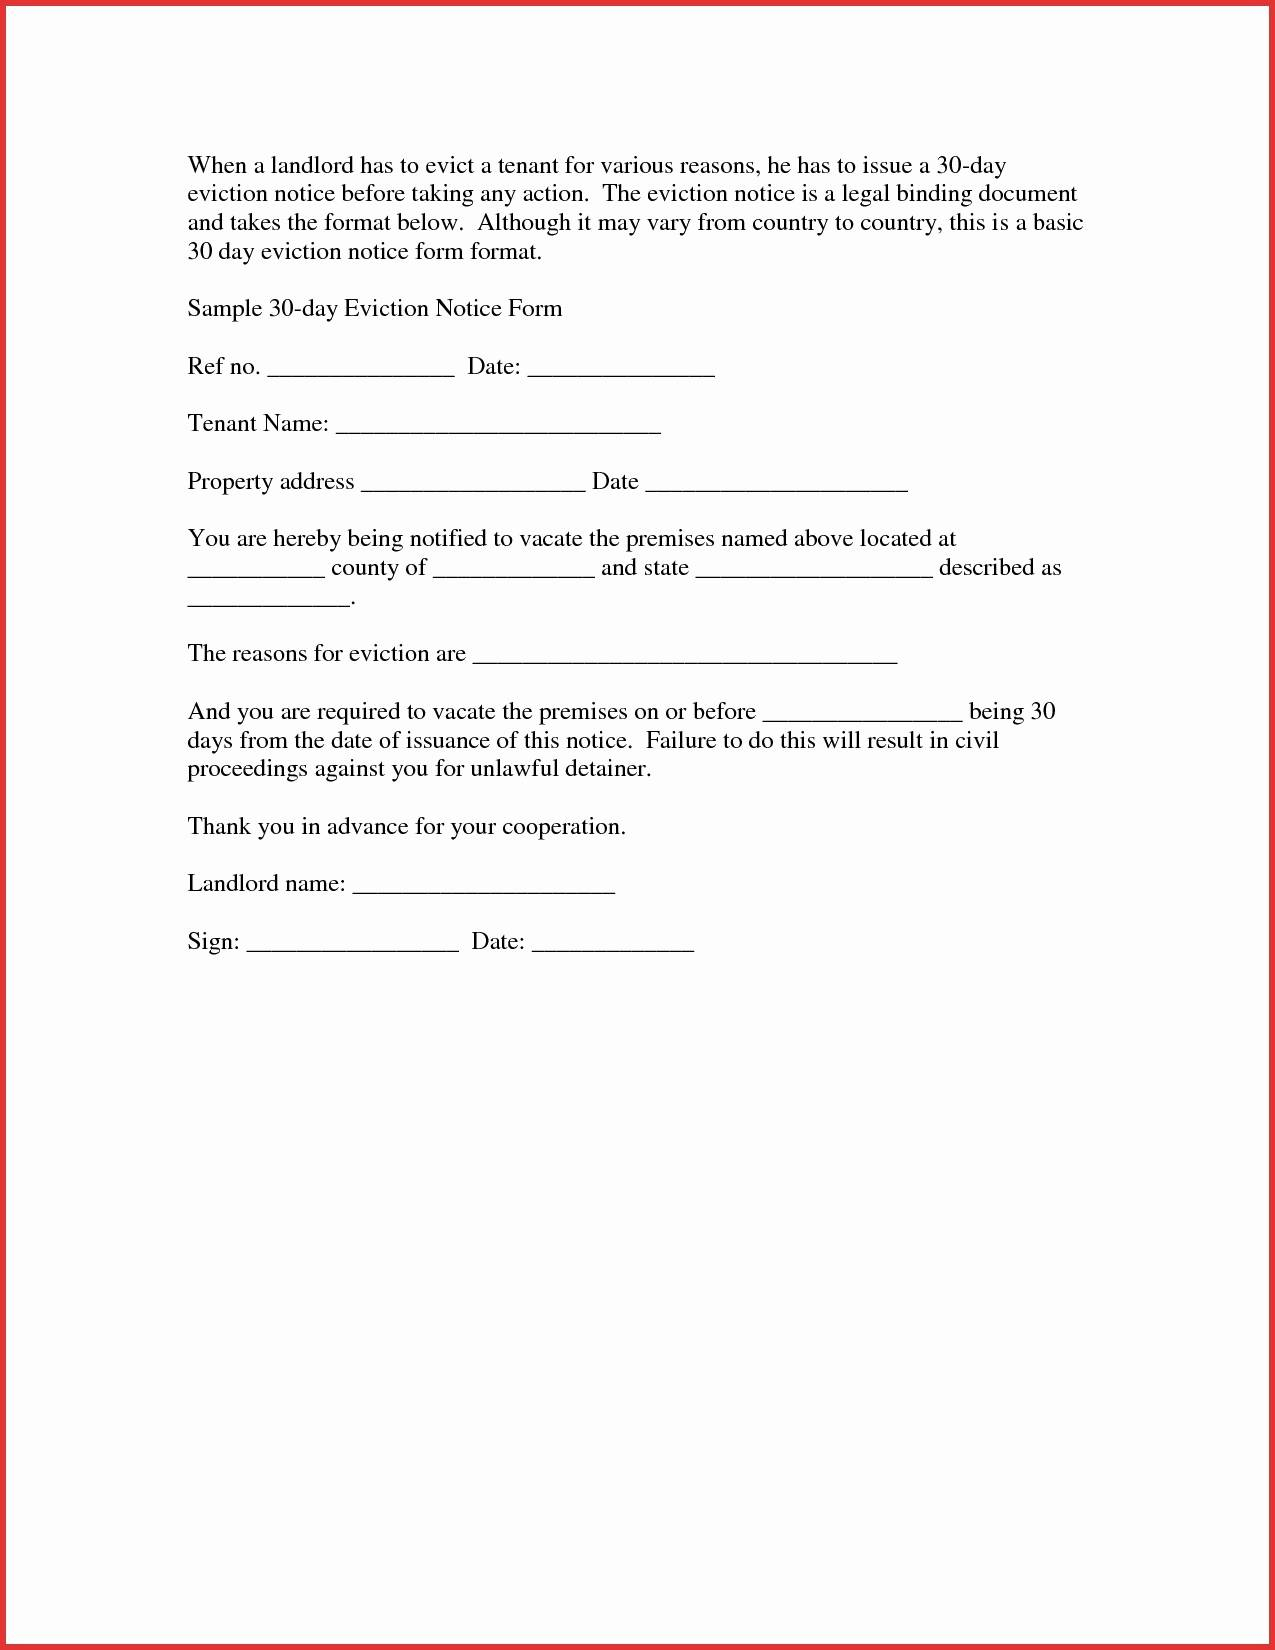 Free Tenant Eviction Letter Template - Tenant Eviction Letter Template Best Free Eviction Notice